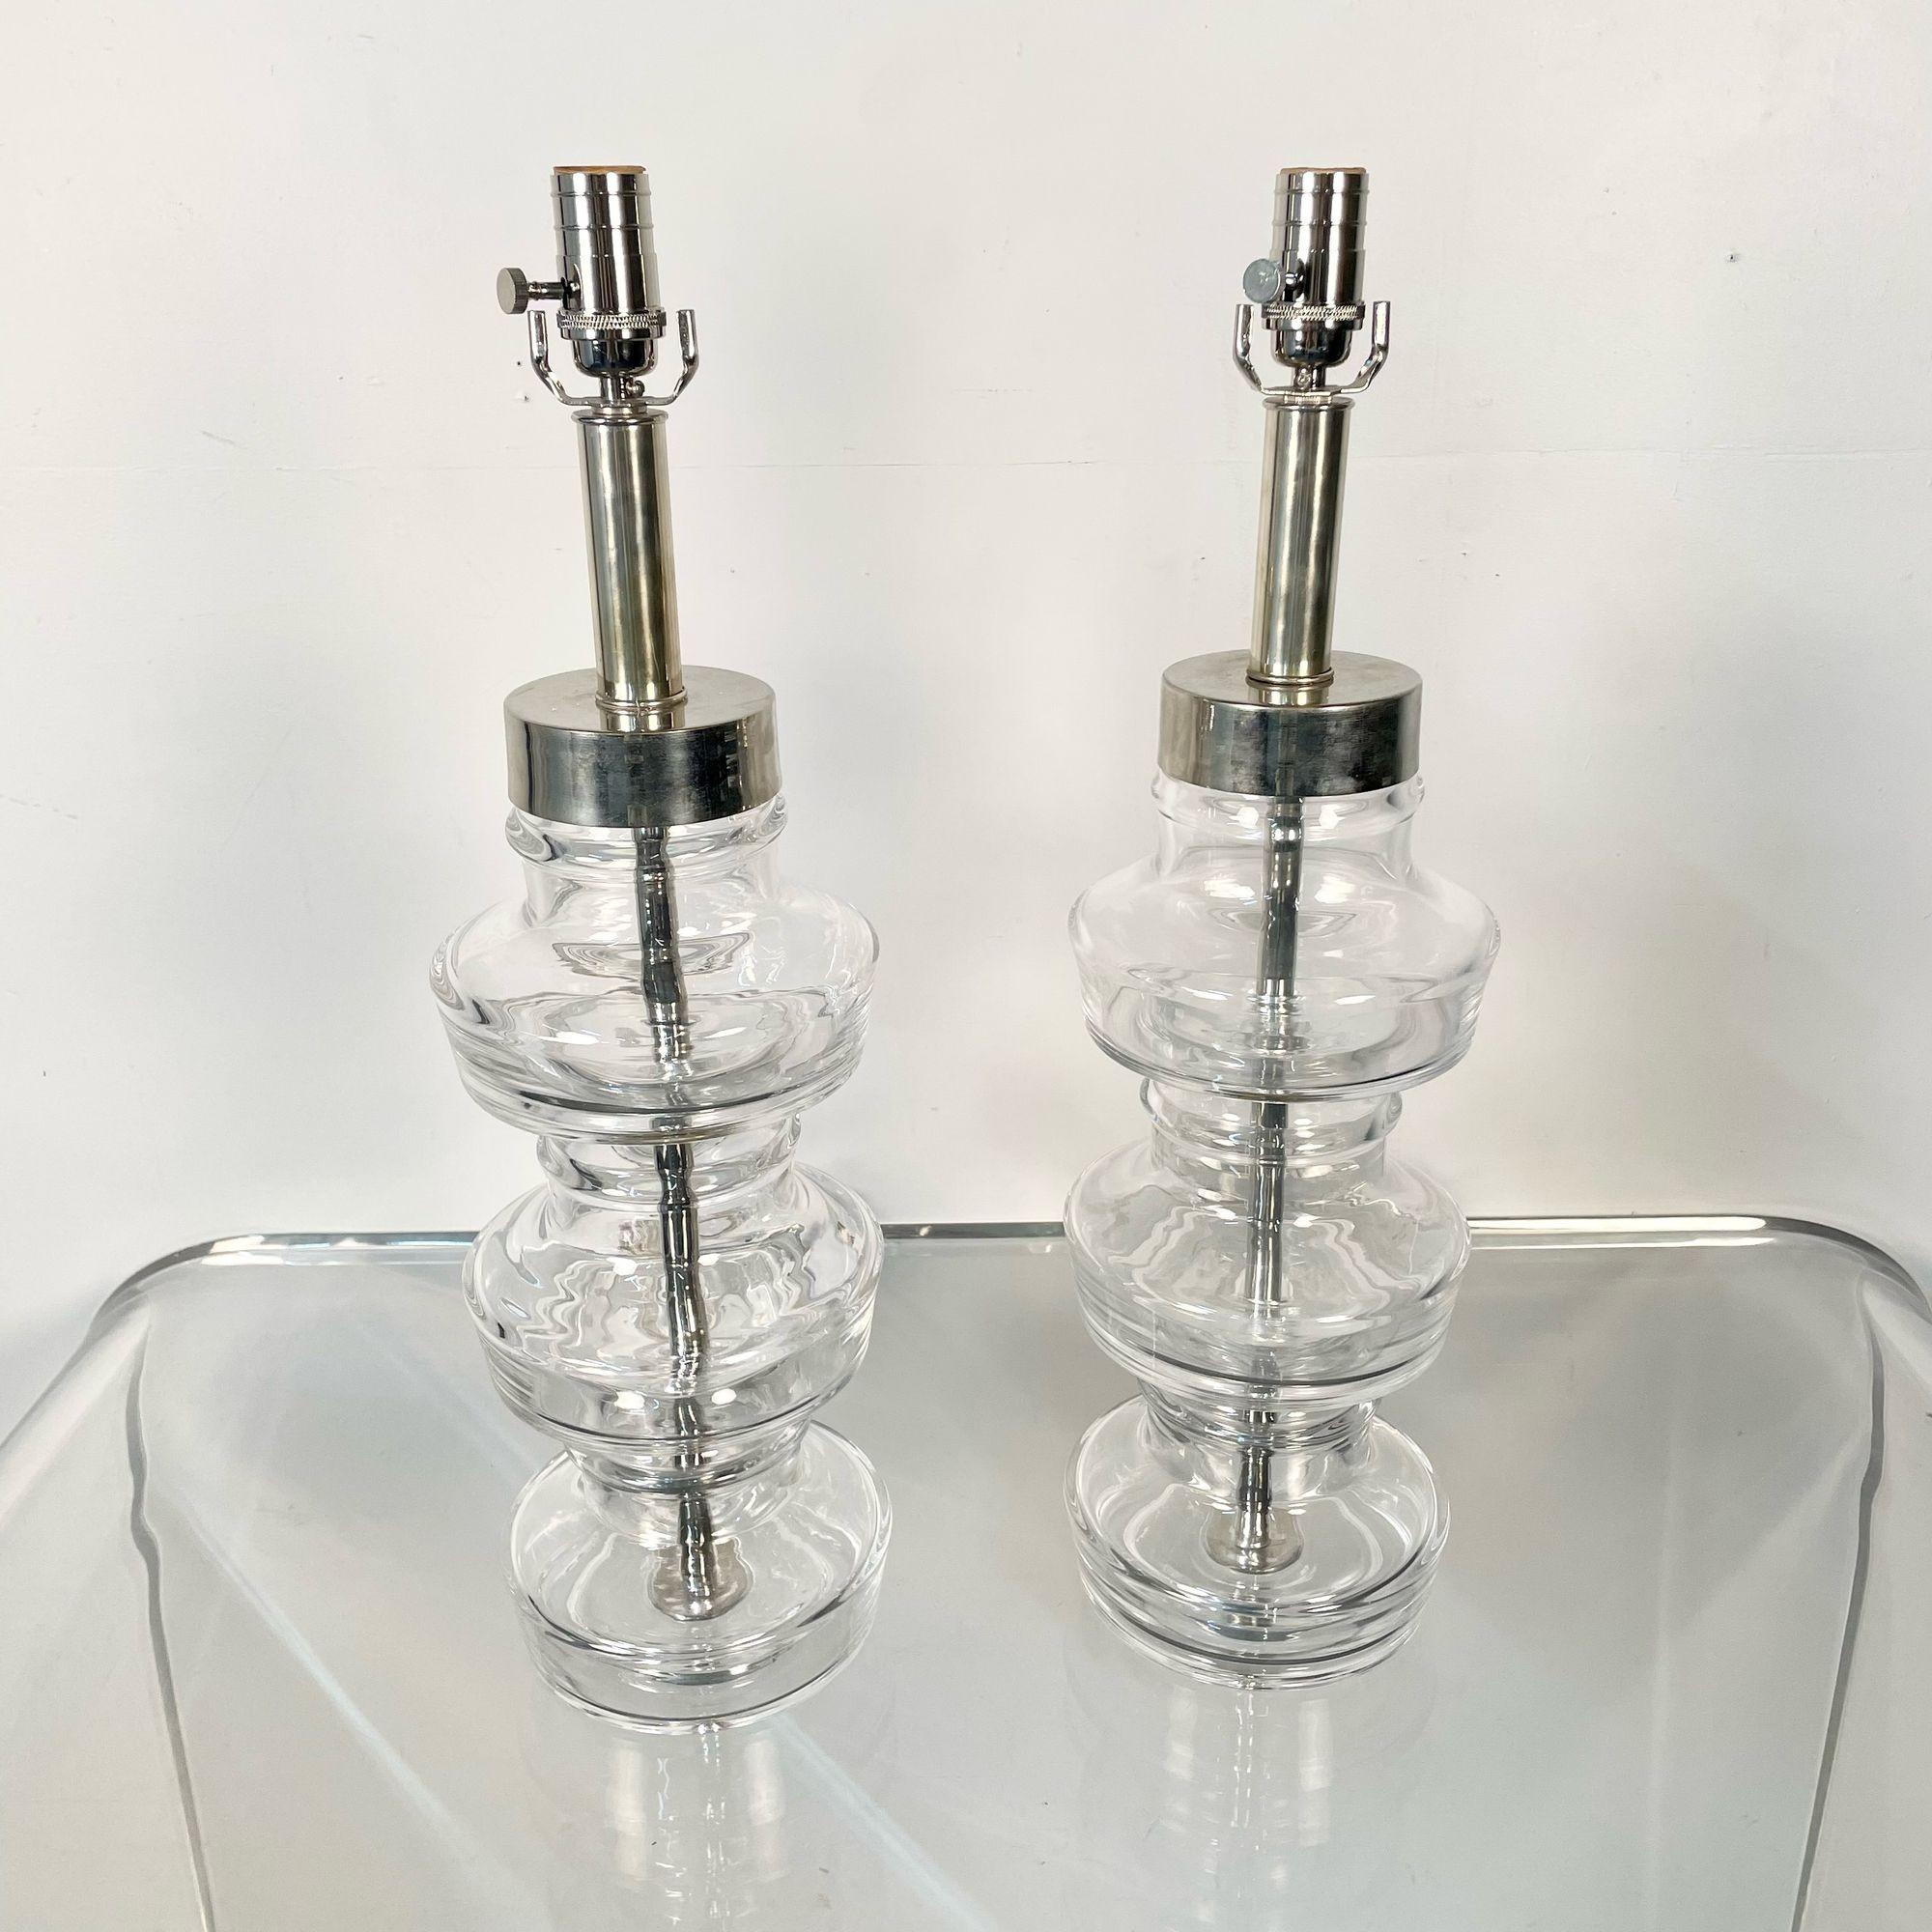 Pair Swedish Mid-Century Modern Translucent Clear Glass Table or Desk Lamps

A pair of clear glass lamps with polished nickel hardware by Carl Fagerlund for Orrefors, Swedish C. 1960's

Glass, Nickel
Sweden, c. 1960s

24.5